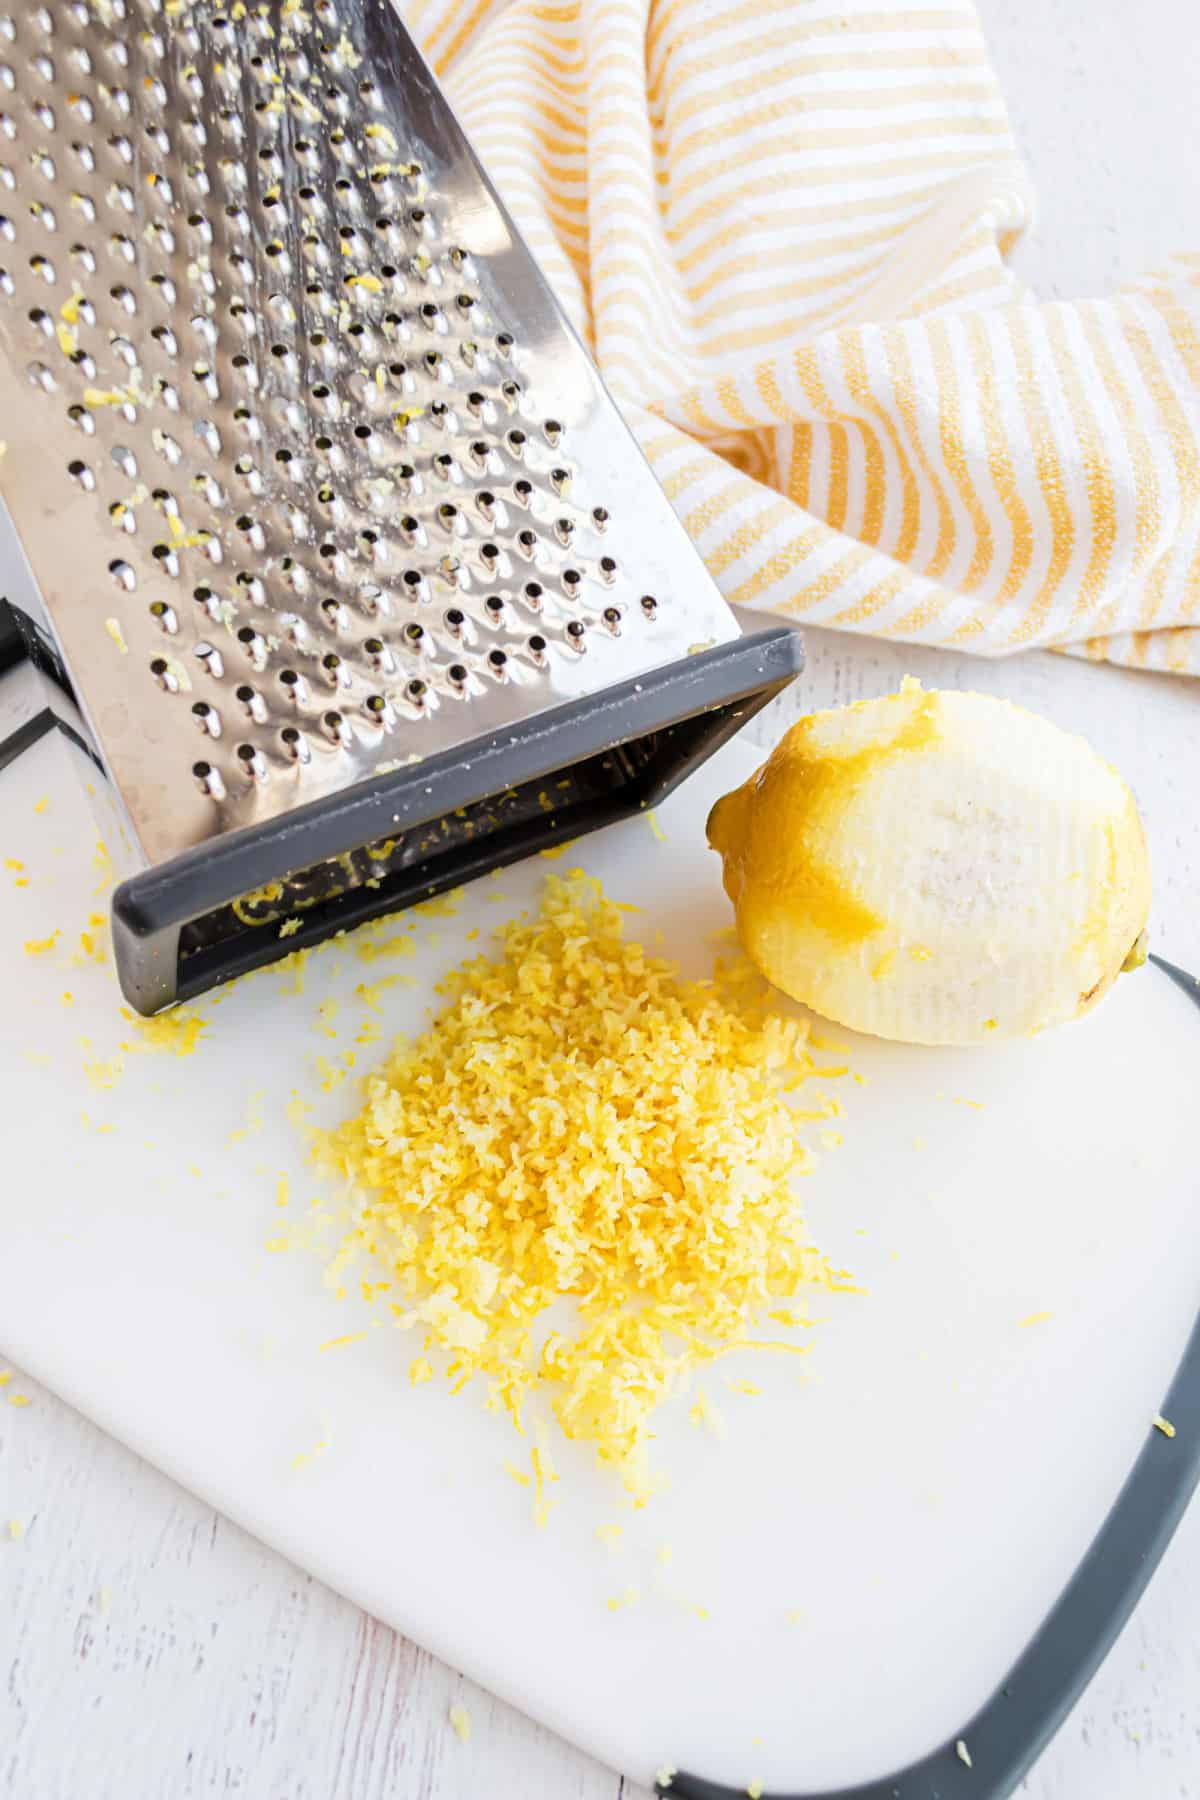 Lemon zested with a box grater.